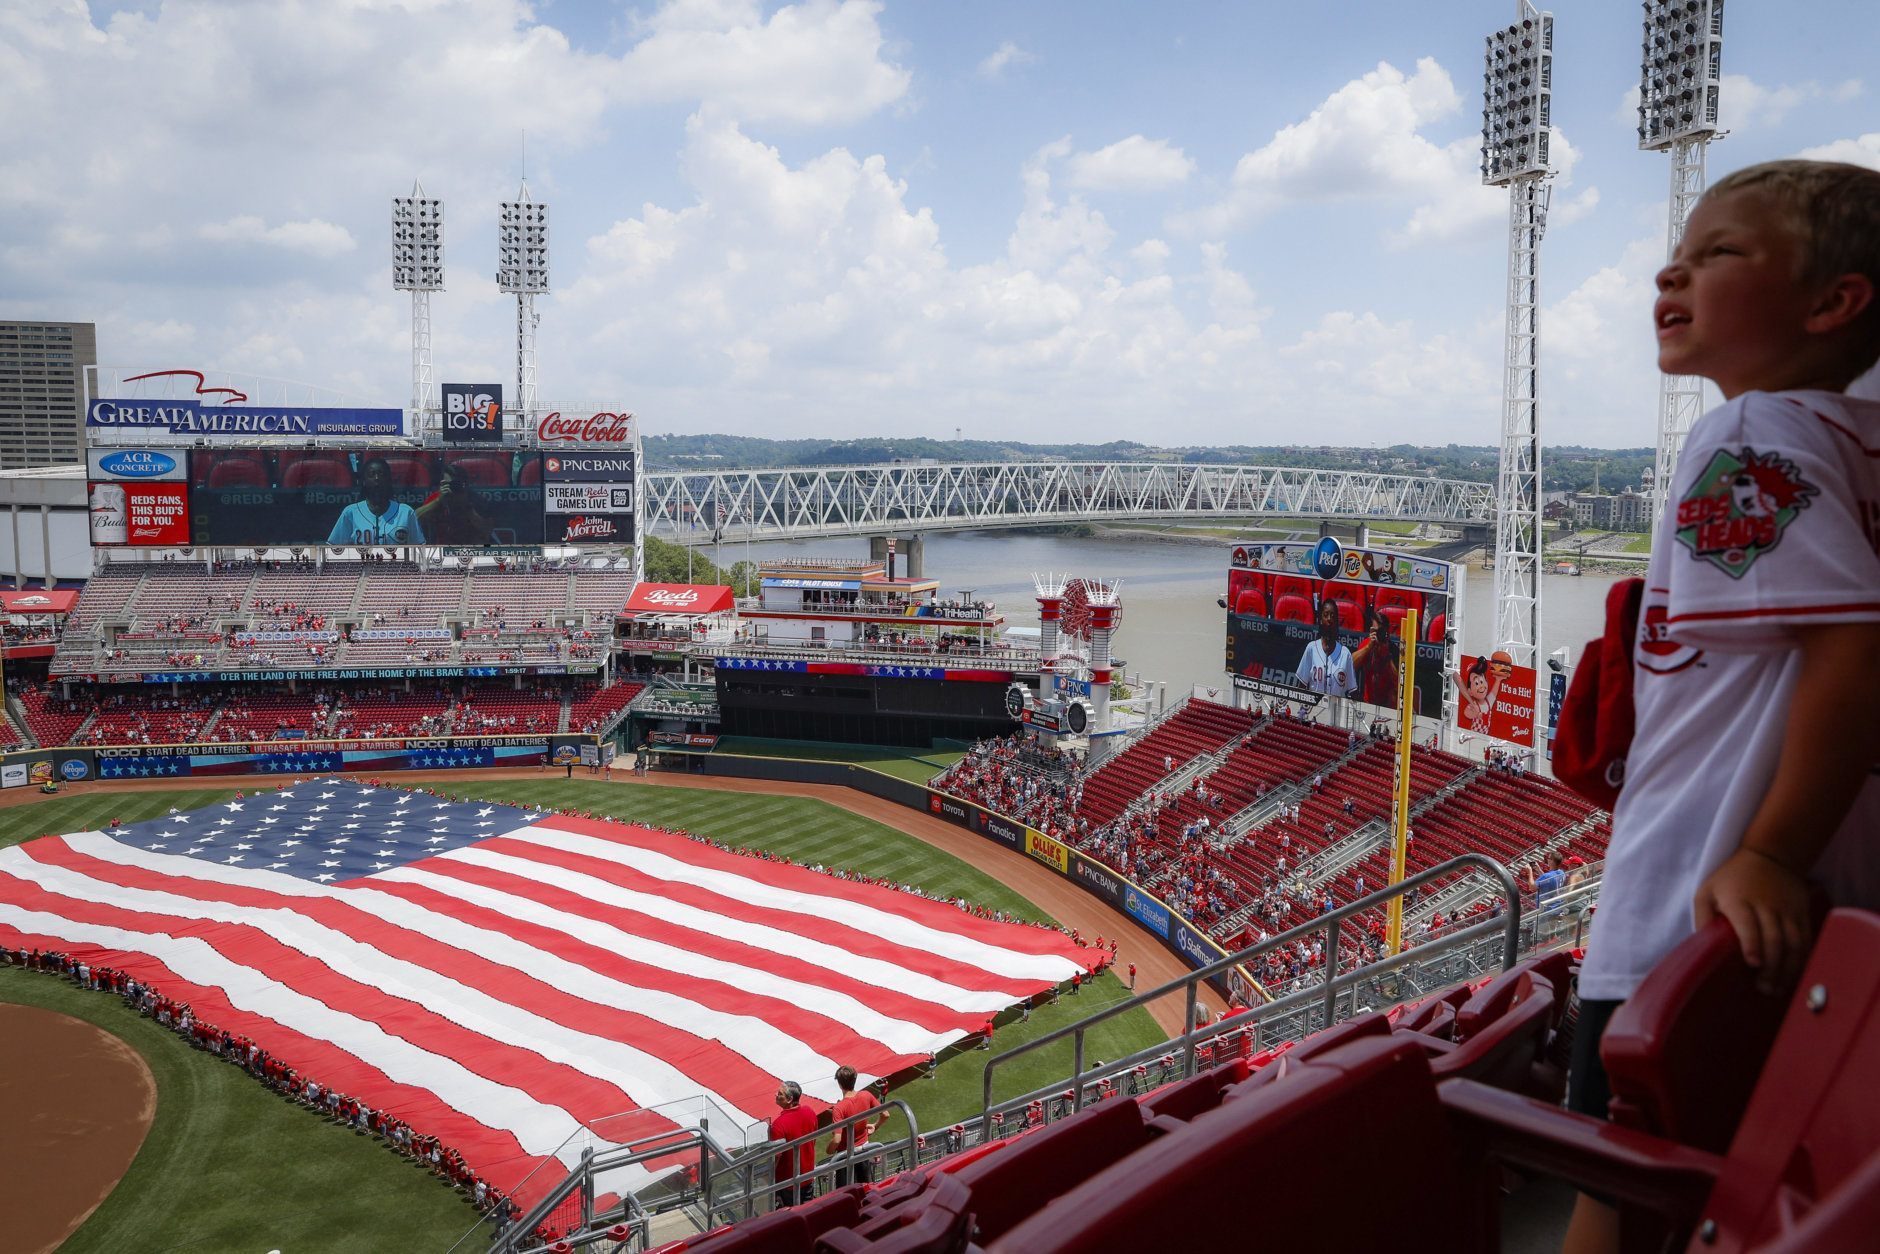 A giant United States flag is unfurled as the national anthem is played before a baseball game between the Cincinnati Reds and the Milwaukee Brewers, Thursday, July 4, 2019, in Cincinnati. (AP Photo/John Minchillo)